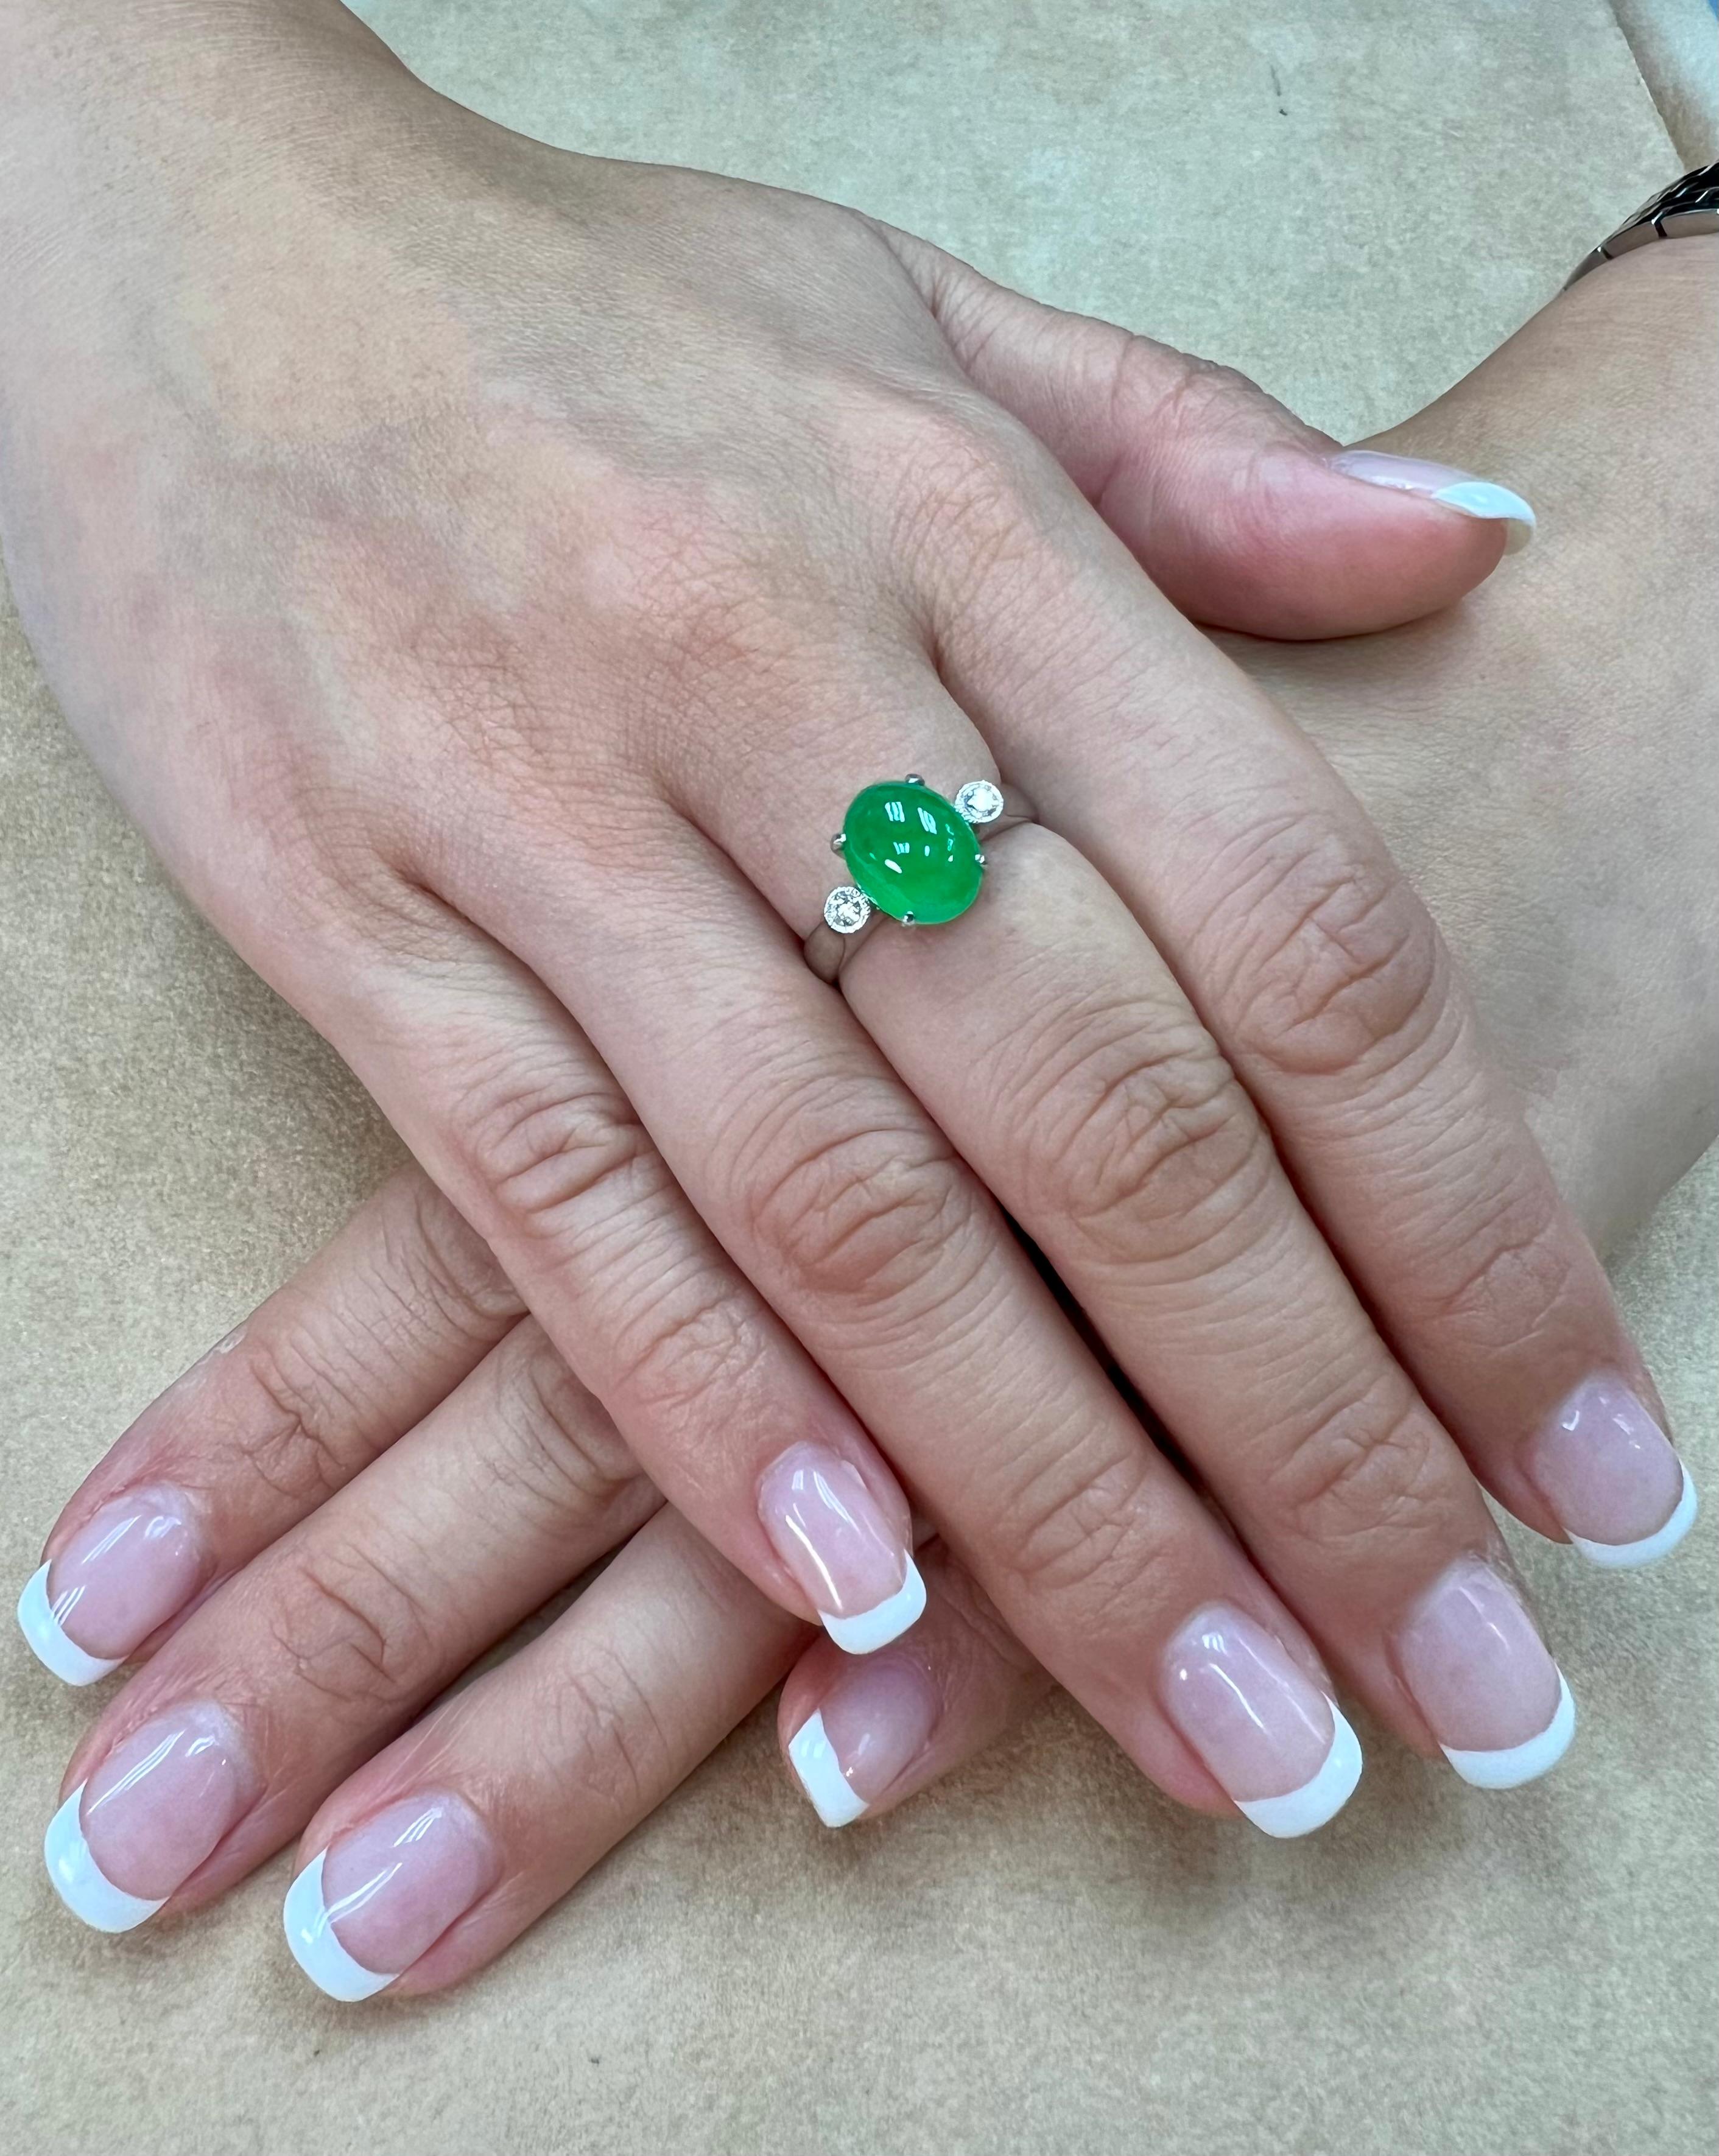 Please check out the HD Video! Here is an apple green Jade and diamond ring with super GLOW!. It is certified natural jadeite jade. The ring is set in 18k white gold and diamonds. There are 2 round brilliant diamonds that are on each side of the